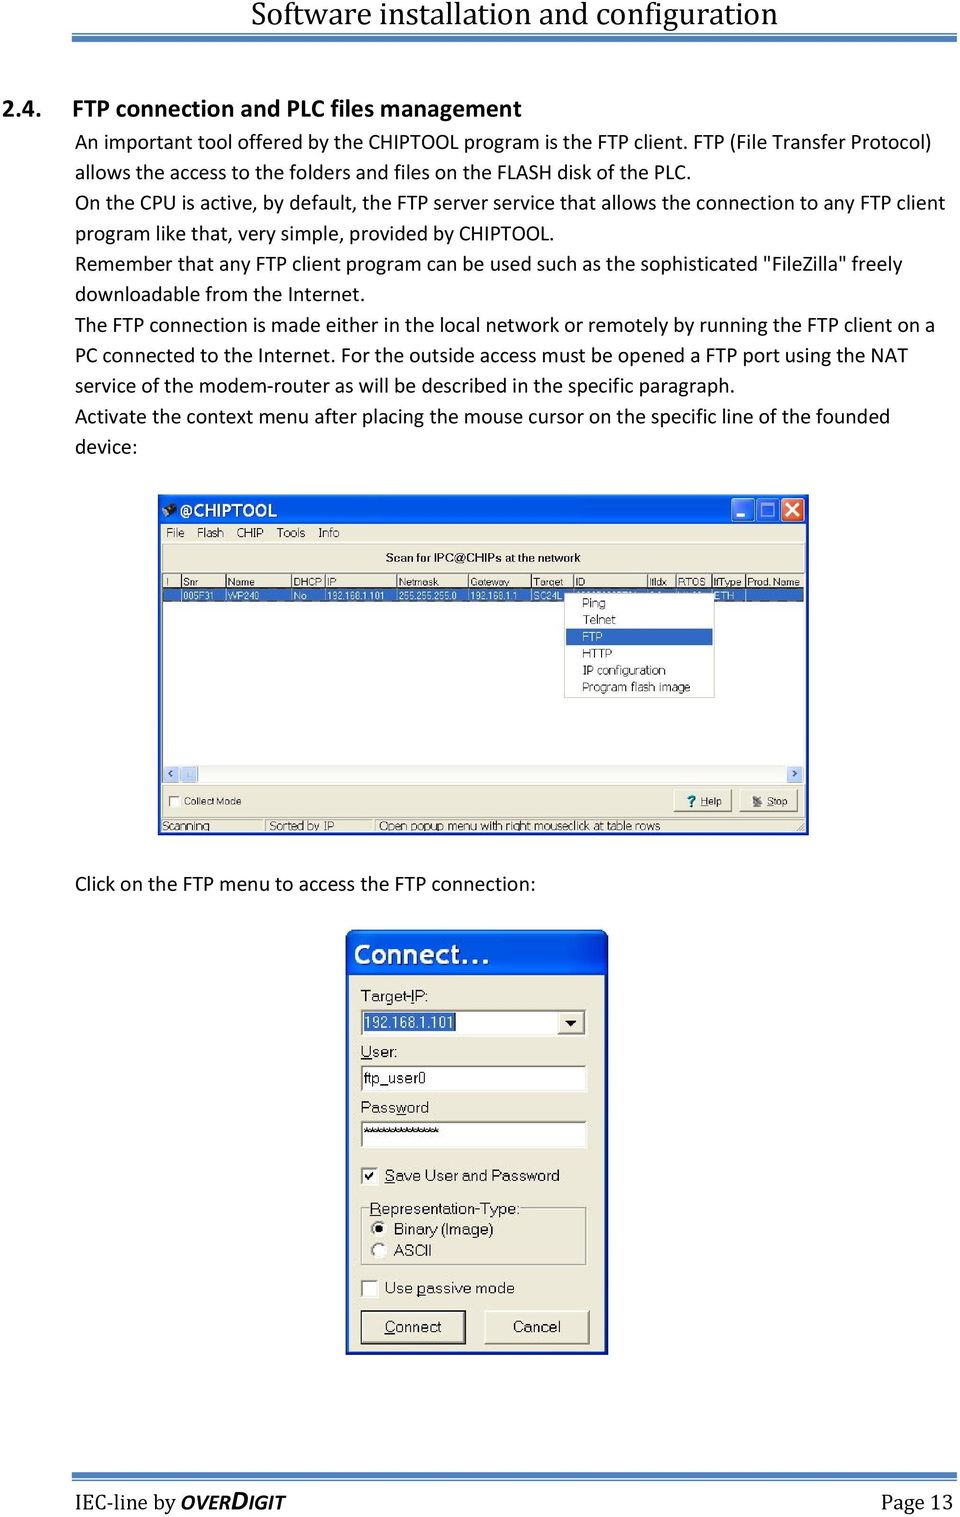 On the CPU is active, by default, the FTP server service that allows the connection to any FTP client program like that, very simple, provided by CHIPTOOL.